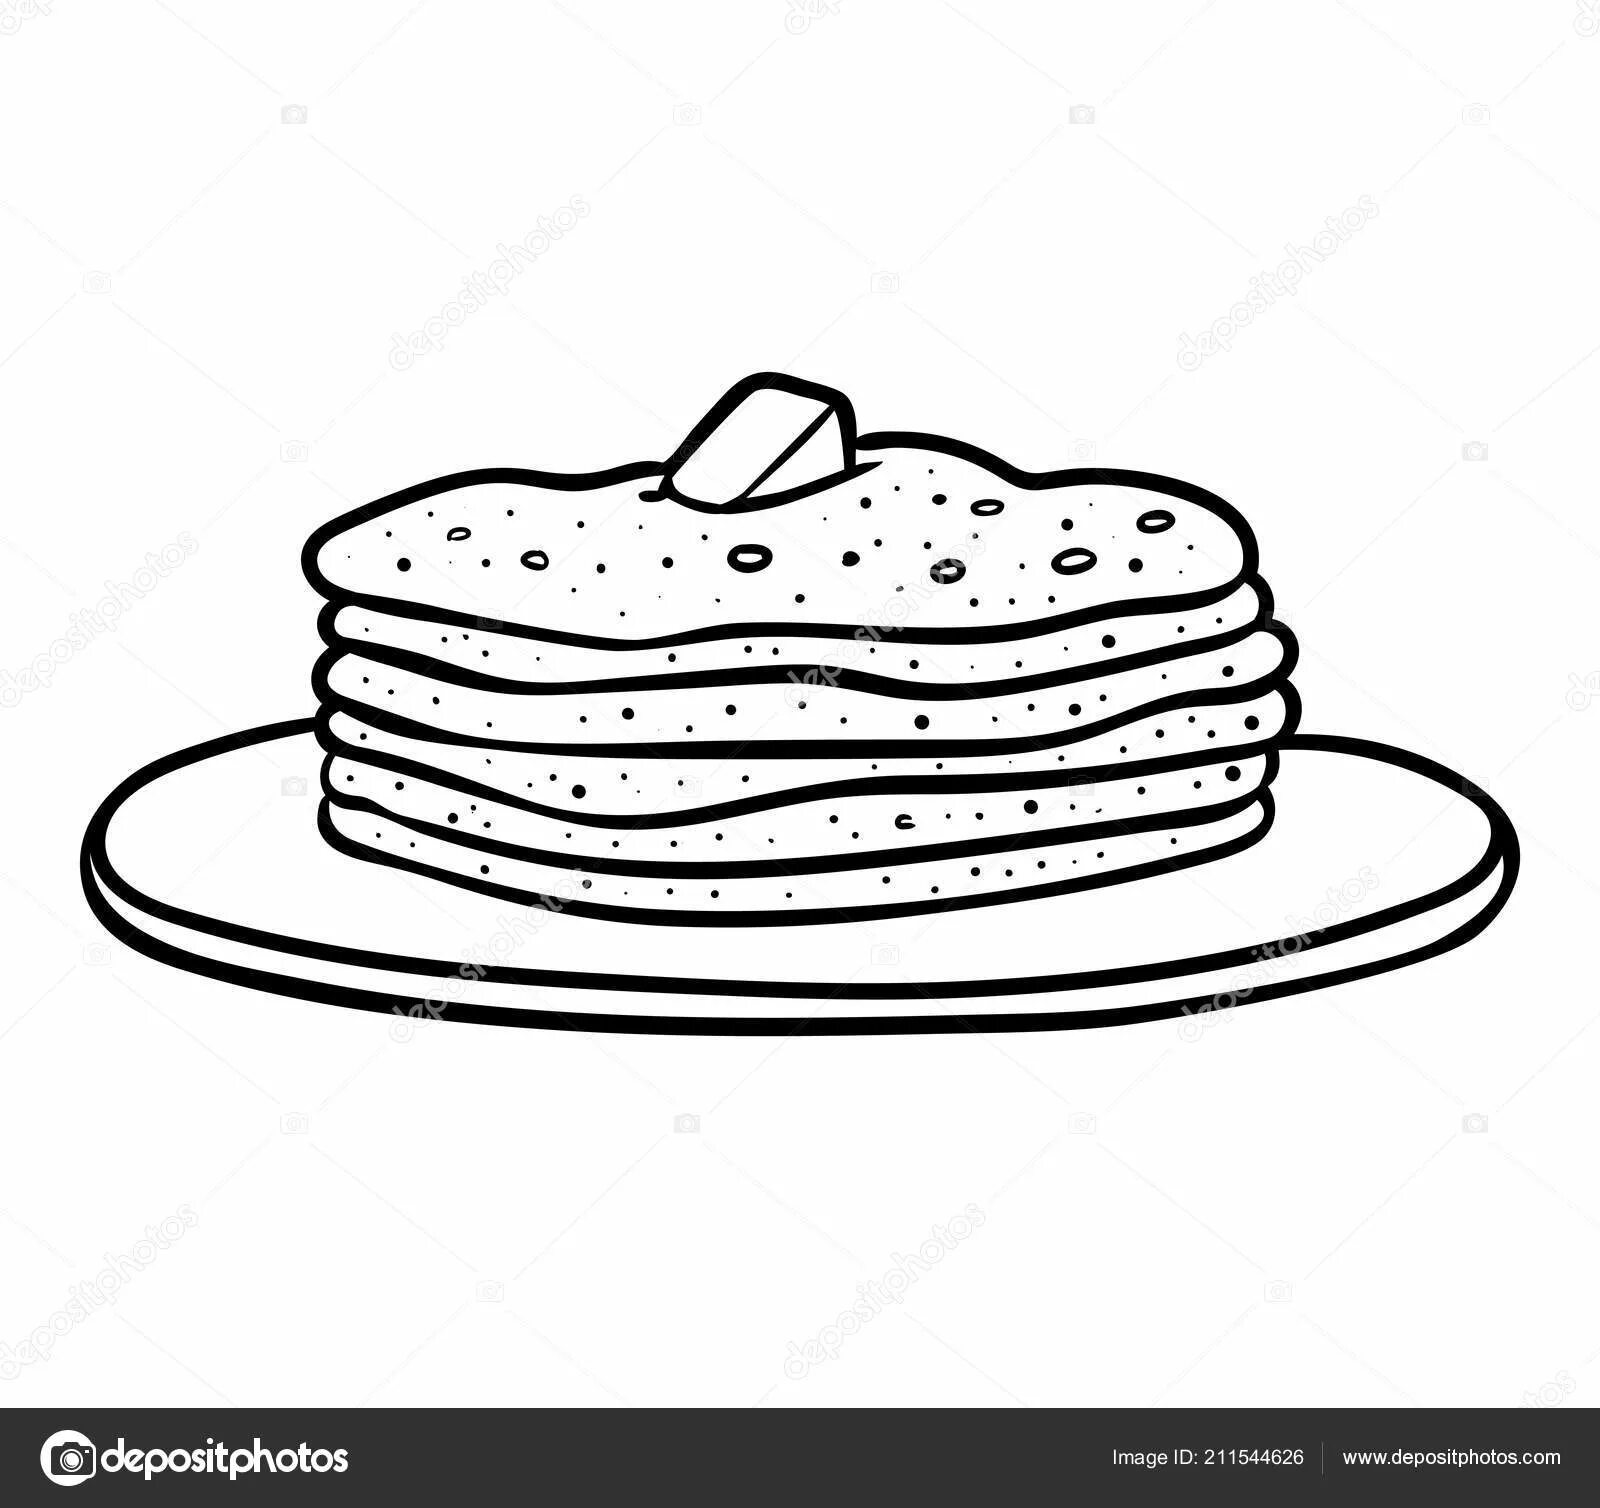 Violent pancakes coloring pages for kids